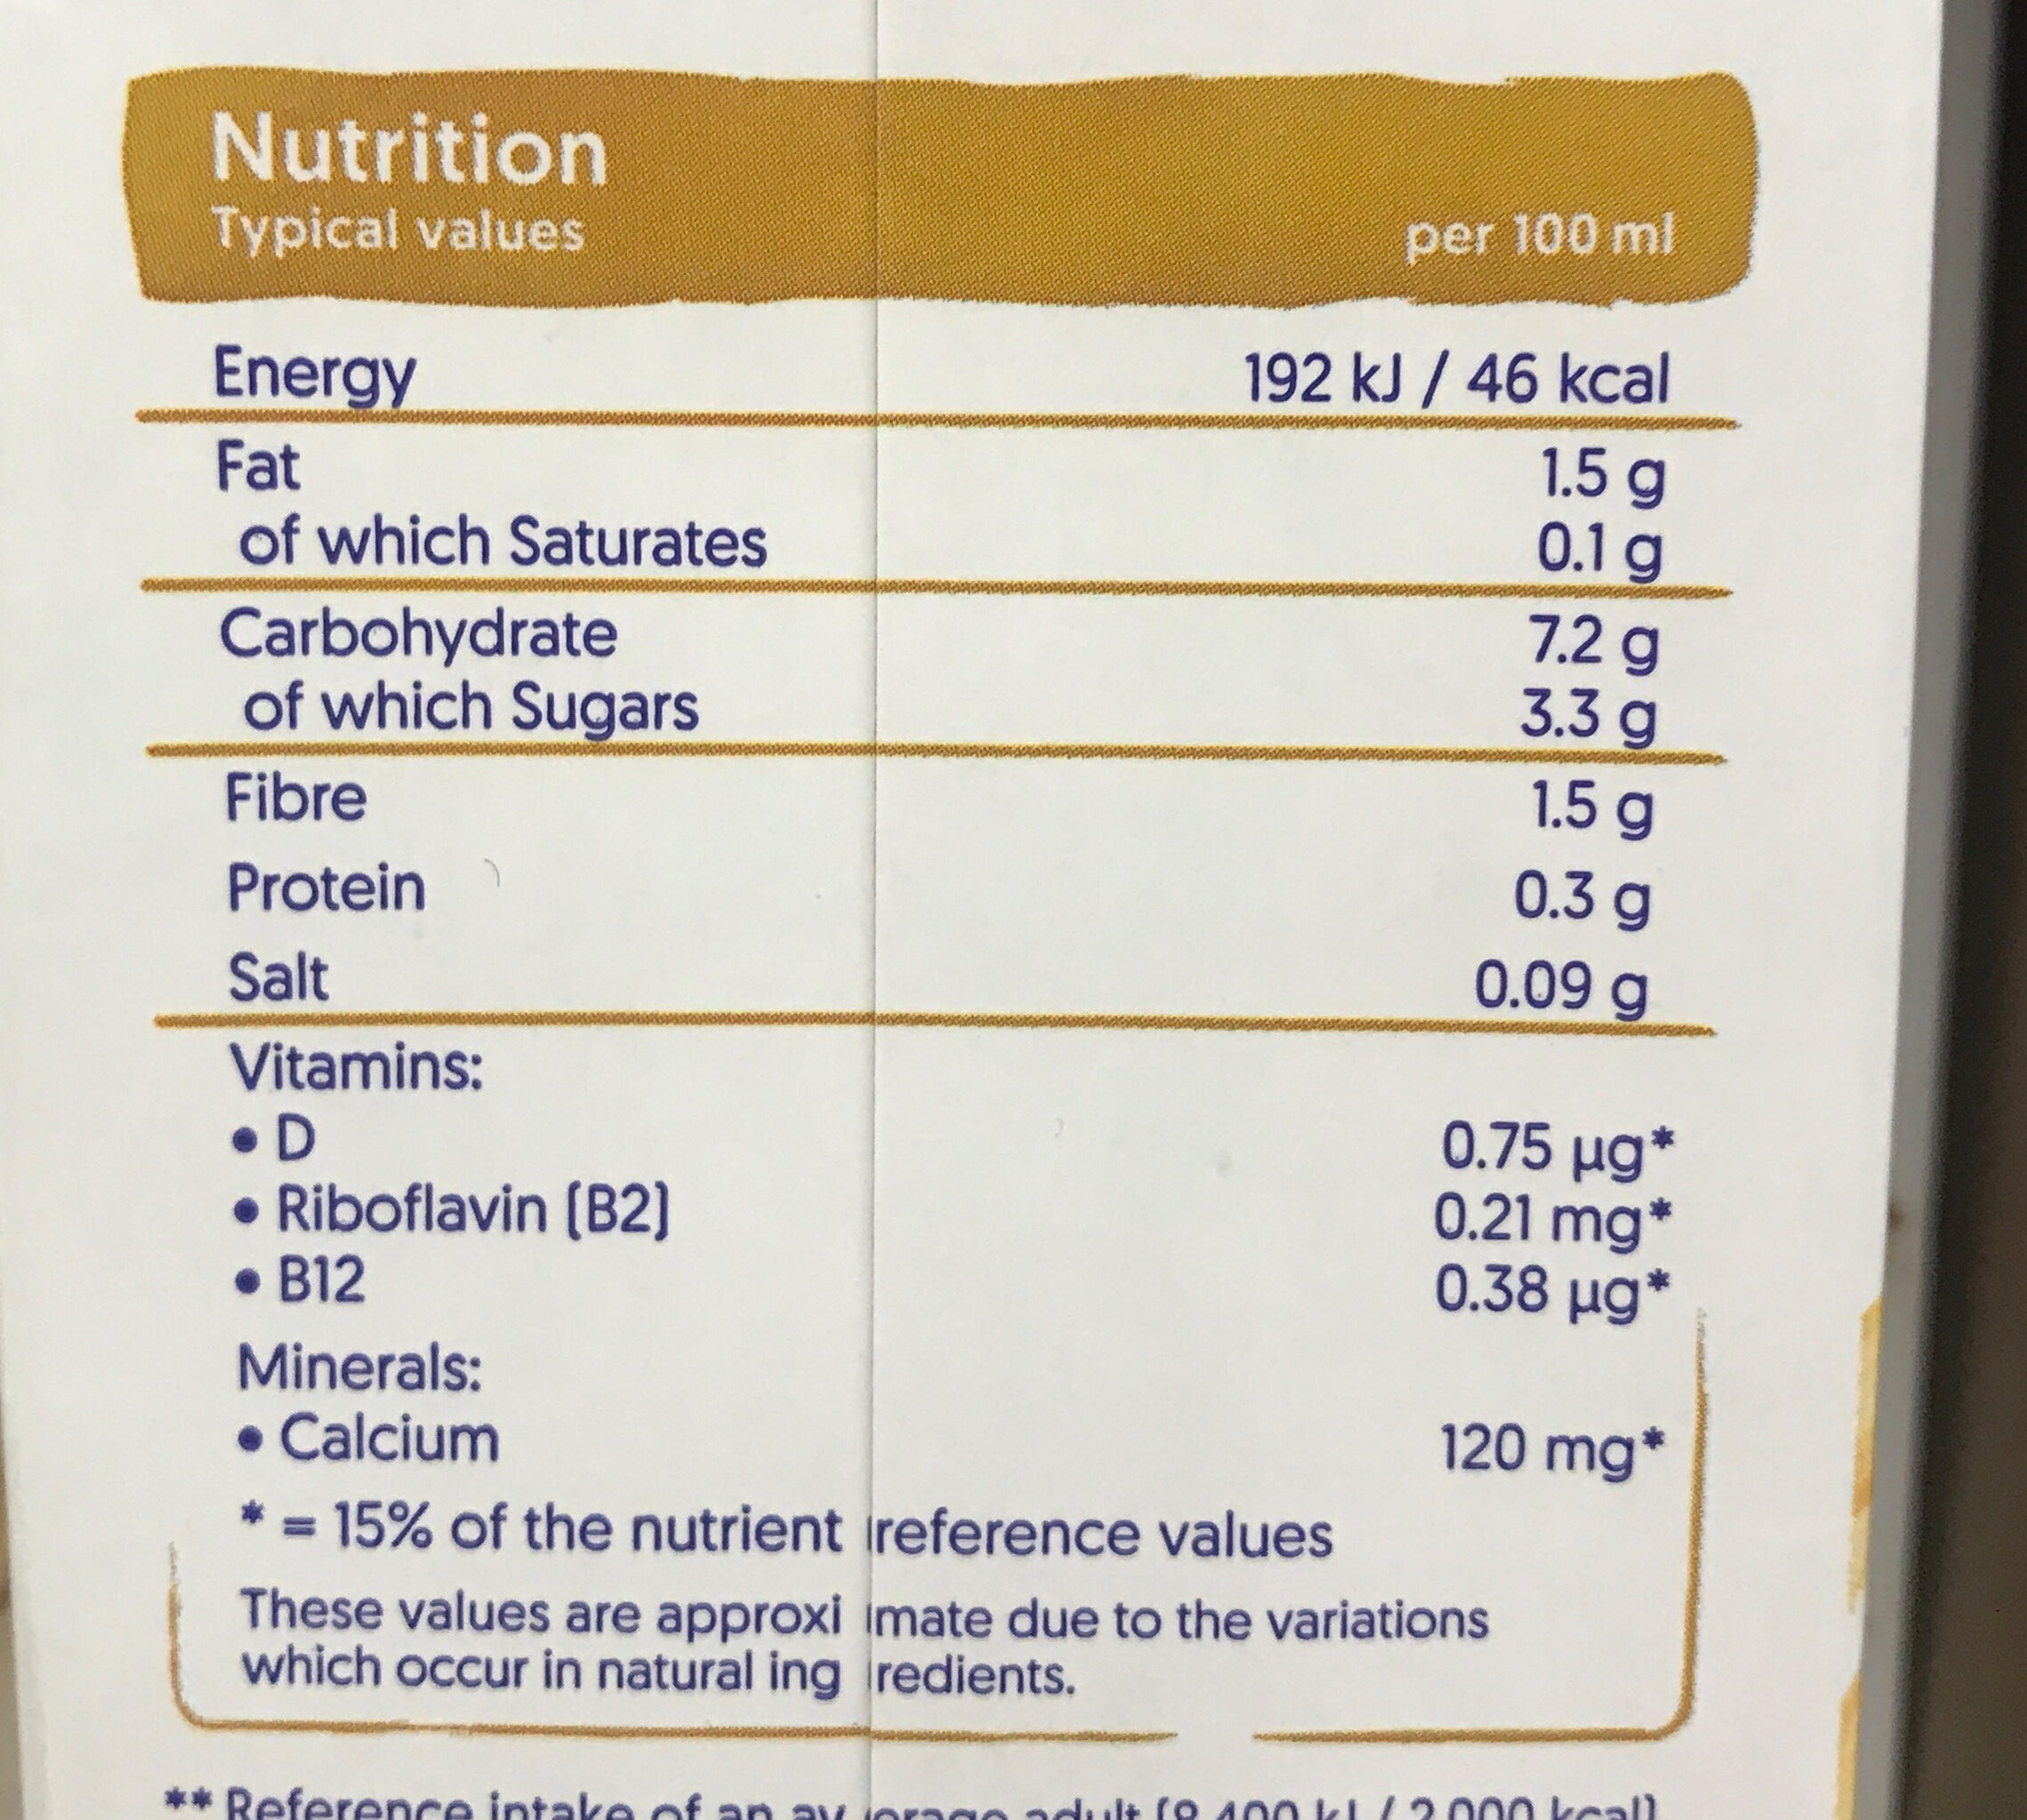 Oat - Nutrition facts